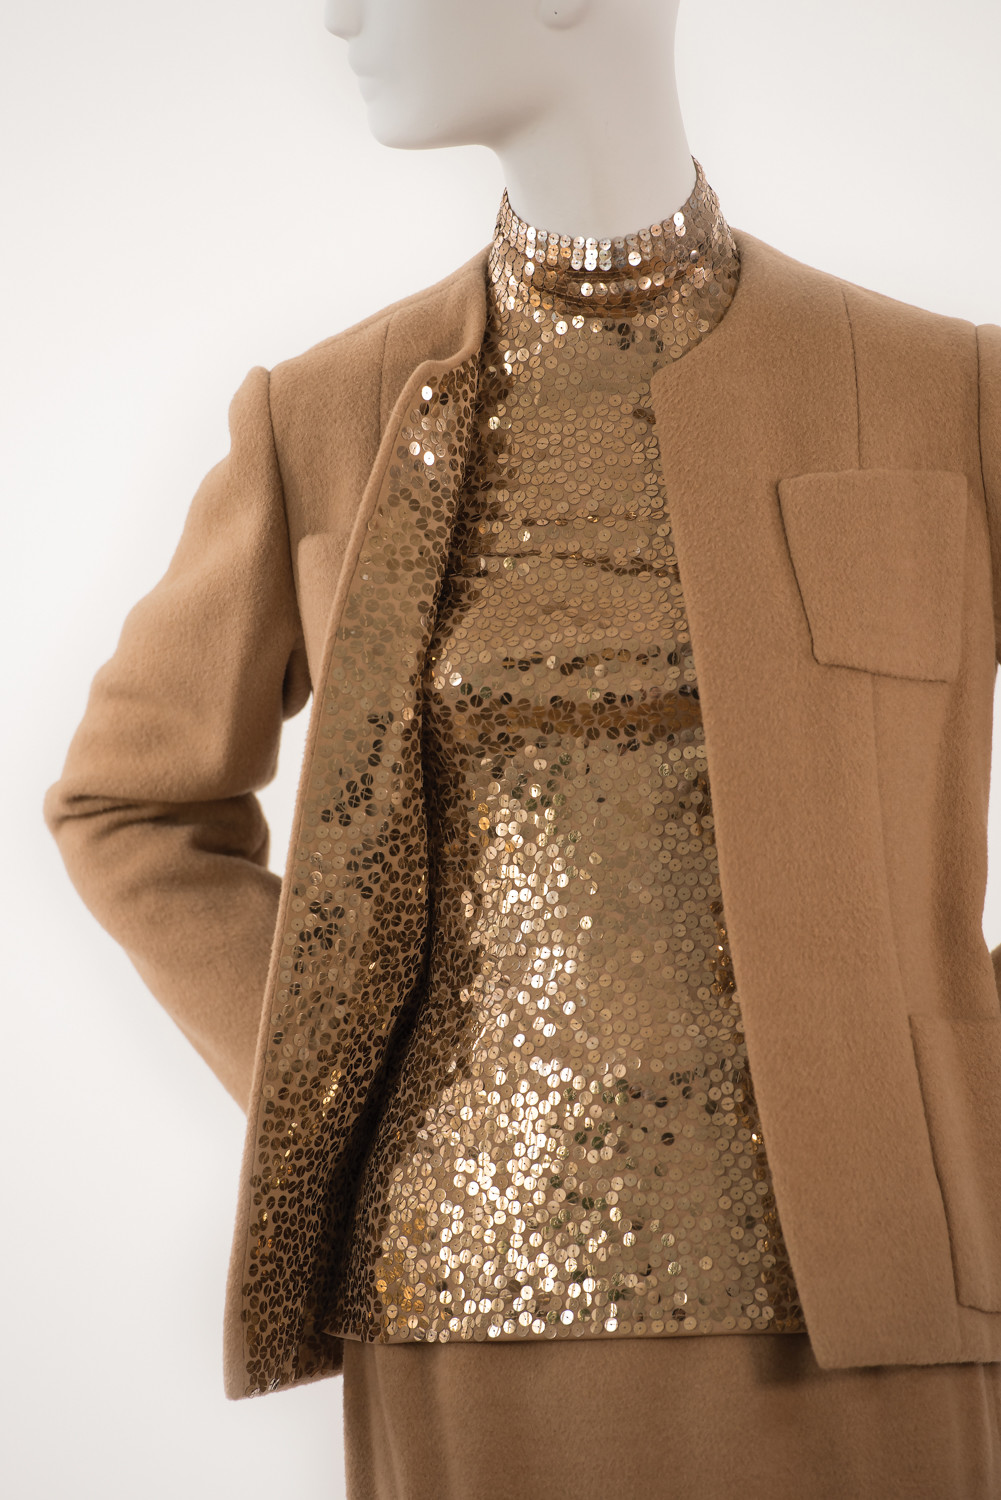 This 1971 camel hair and paillette theater suit is one of nearly 100 items featured at The Museum at Fashion Institute of Technology’s exhibition on fashion designer Norman Norell. Some of his clients included former first ladies Jacqueline Kennedy Onassis and Lady Bird Johnson. Michelle Obama wore a vintage dress by Norell during her time in the White House.